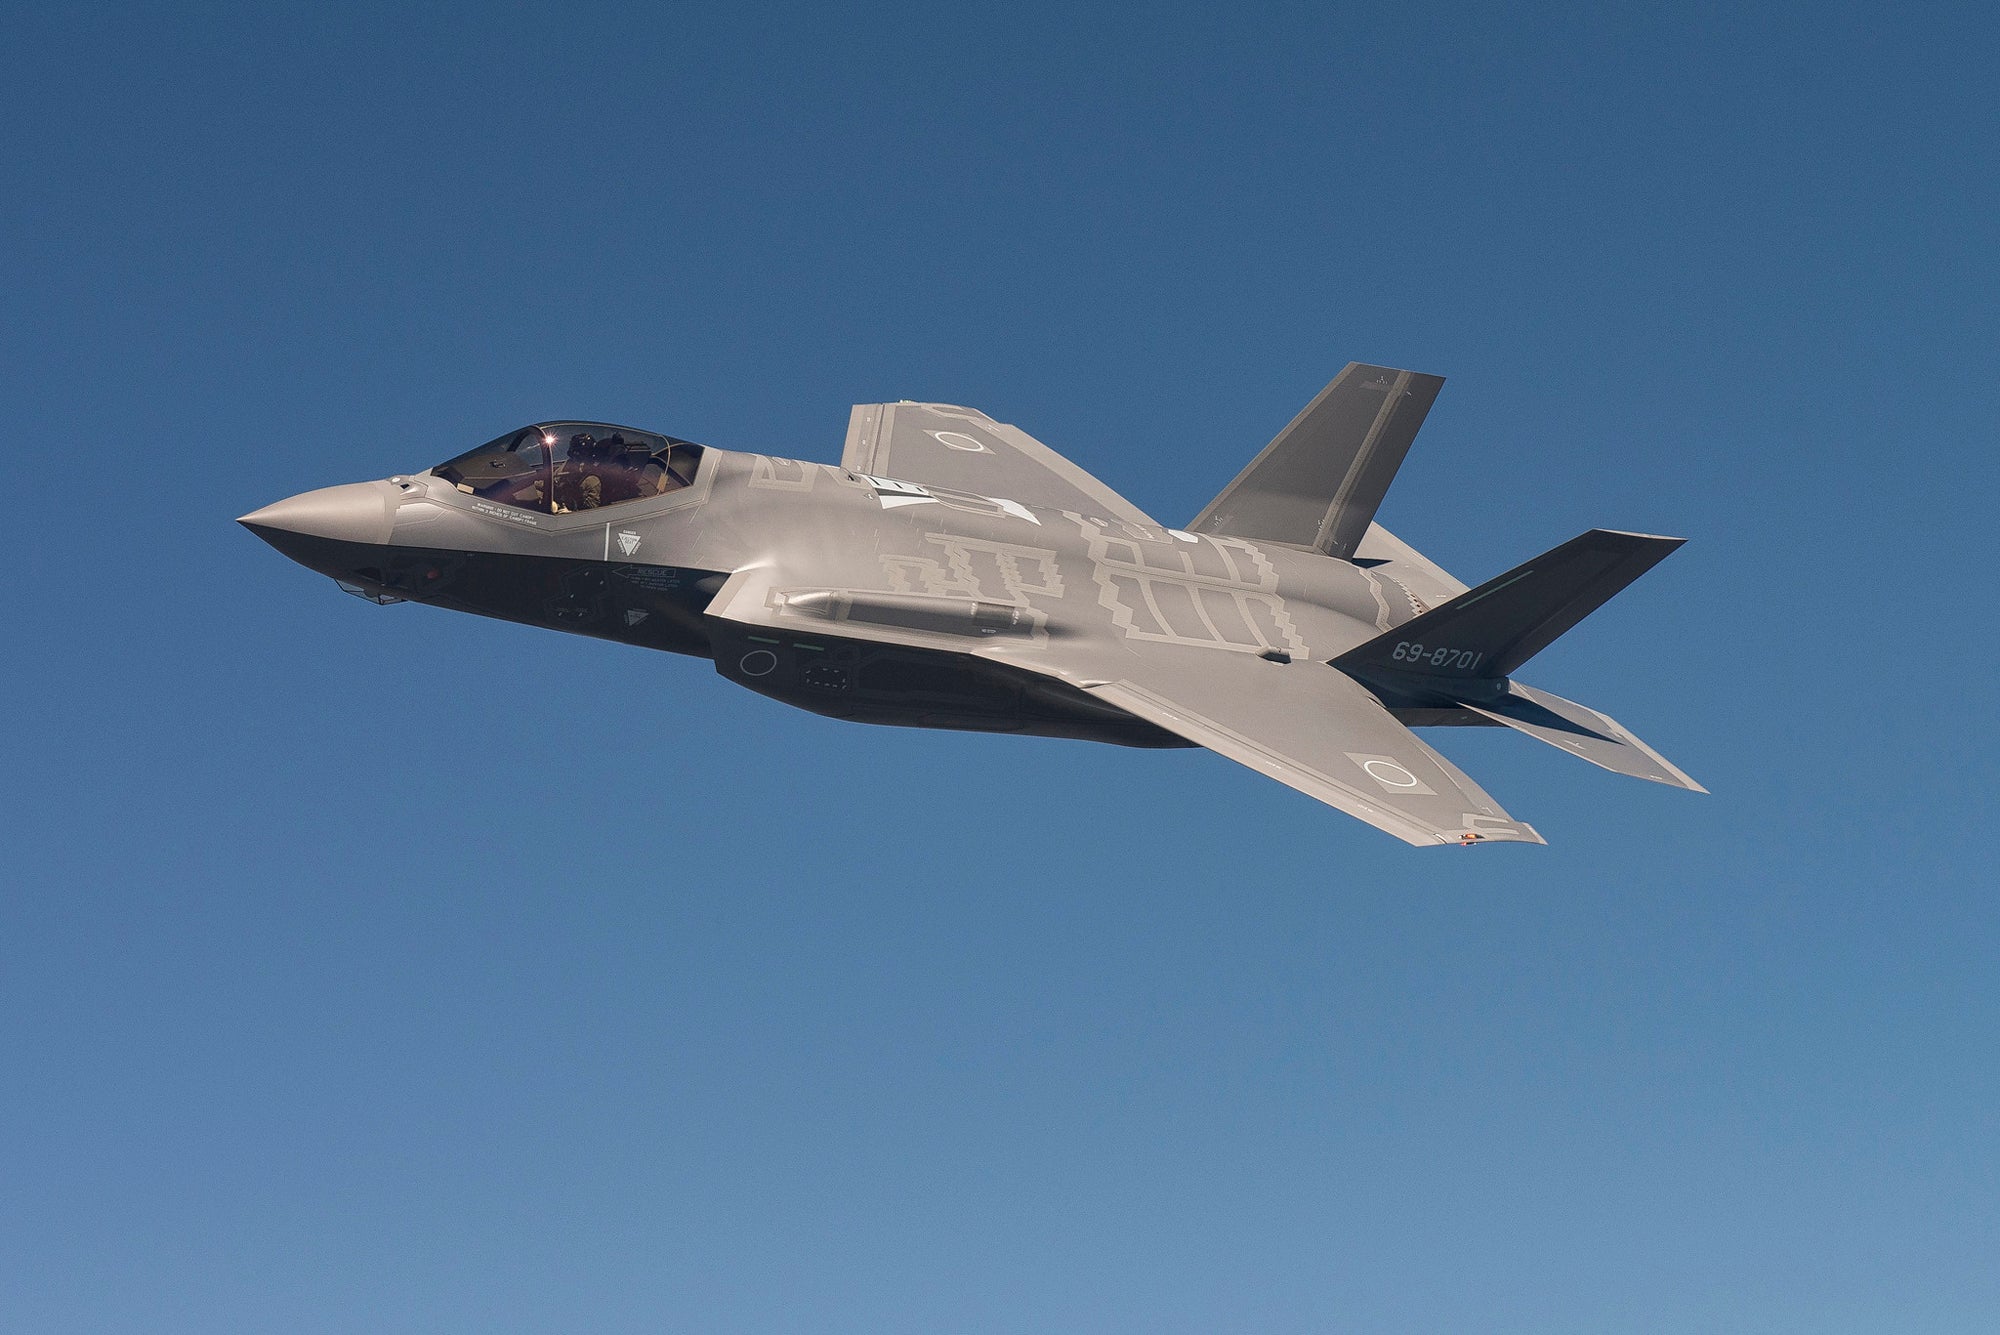 The F-35 is More than a Fighter Jet: It's a "Key Net-Enabling Node" - We Toured the Facility